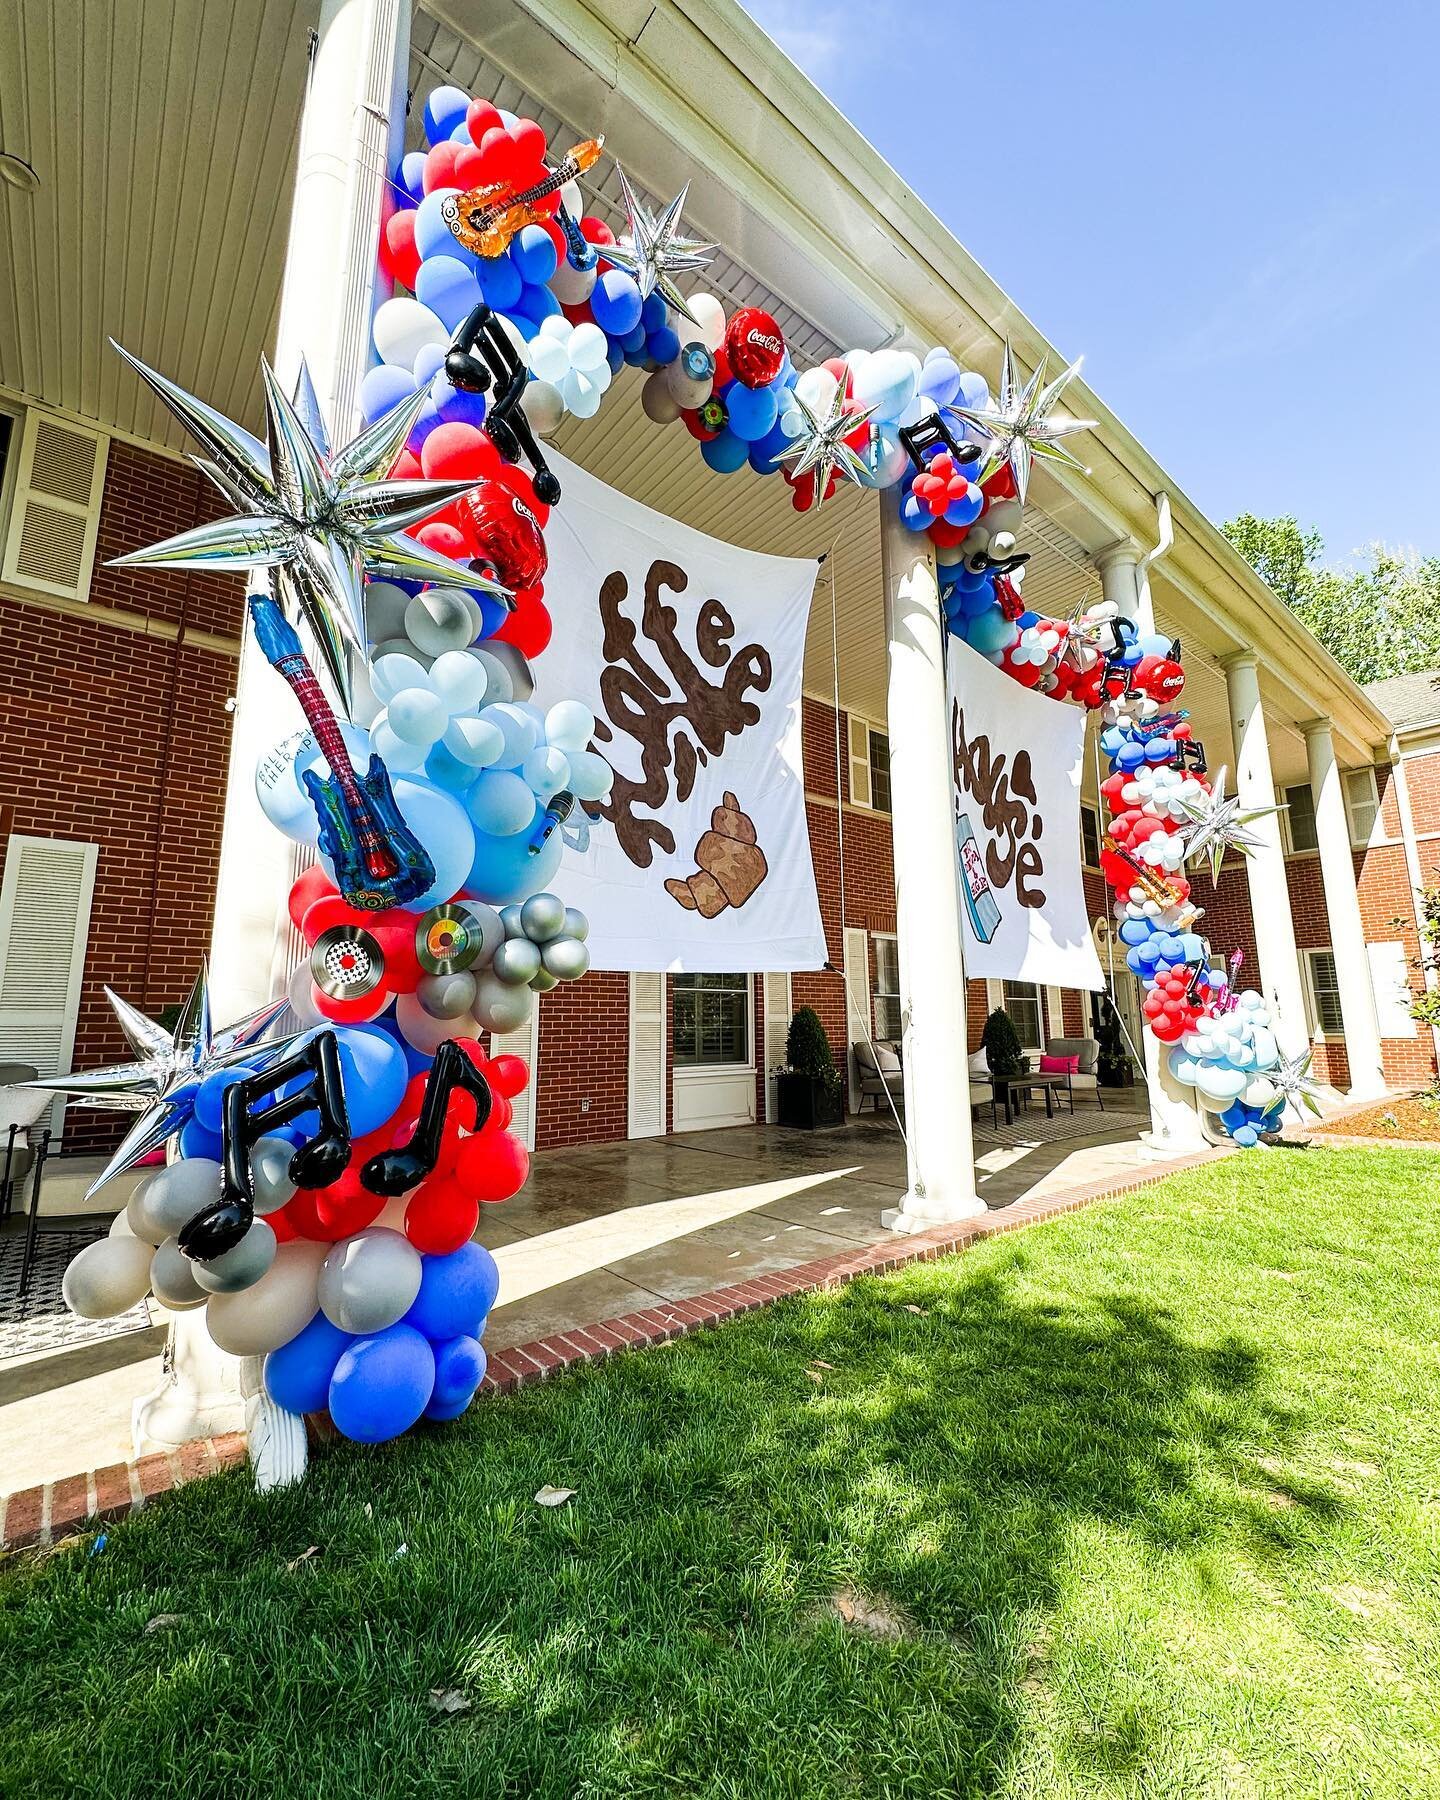 Coffee House but make it Retro🎸💙

ATTN Sororites!!! Spice up your Work Week, Rush and Bid Day with a touch of BT🎈✨&mdash; DM to book with us!
&bull;
&bull;
&bull;
#balloontherapyokc #bt #balloons #balloongarland #balloondecor #rushweek #bidday #wo